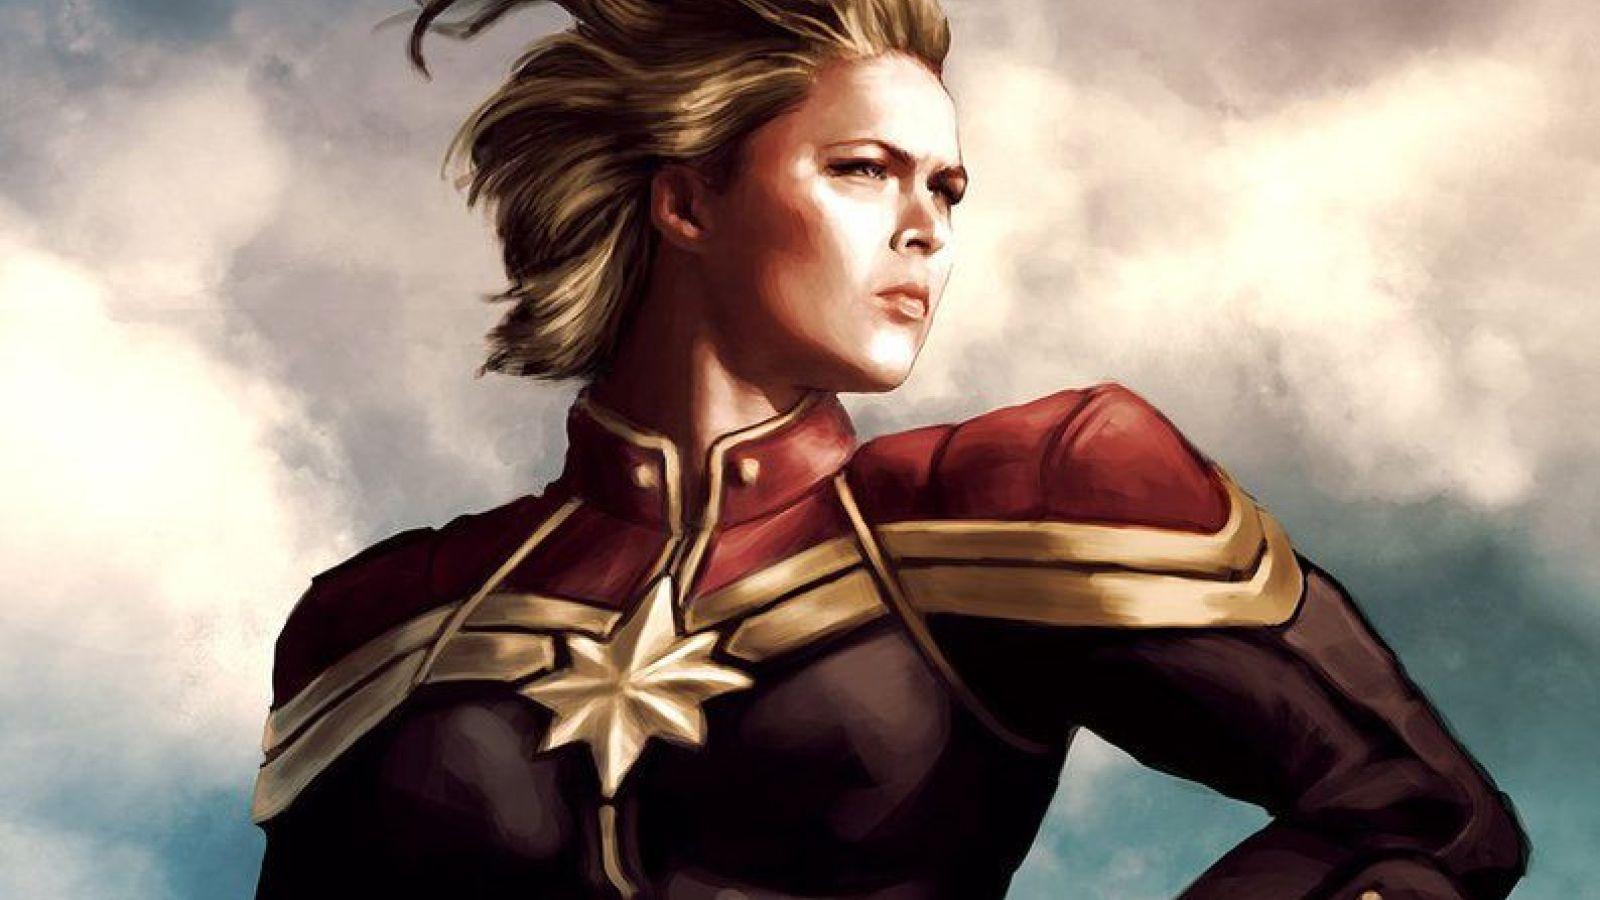 Captain marvel wallpapers Gallery